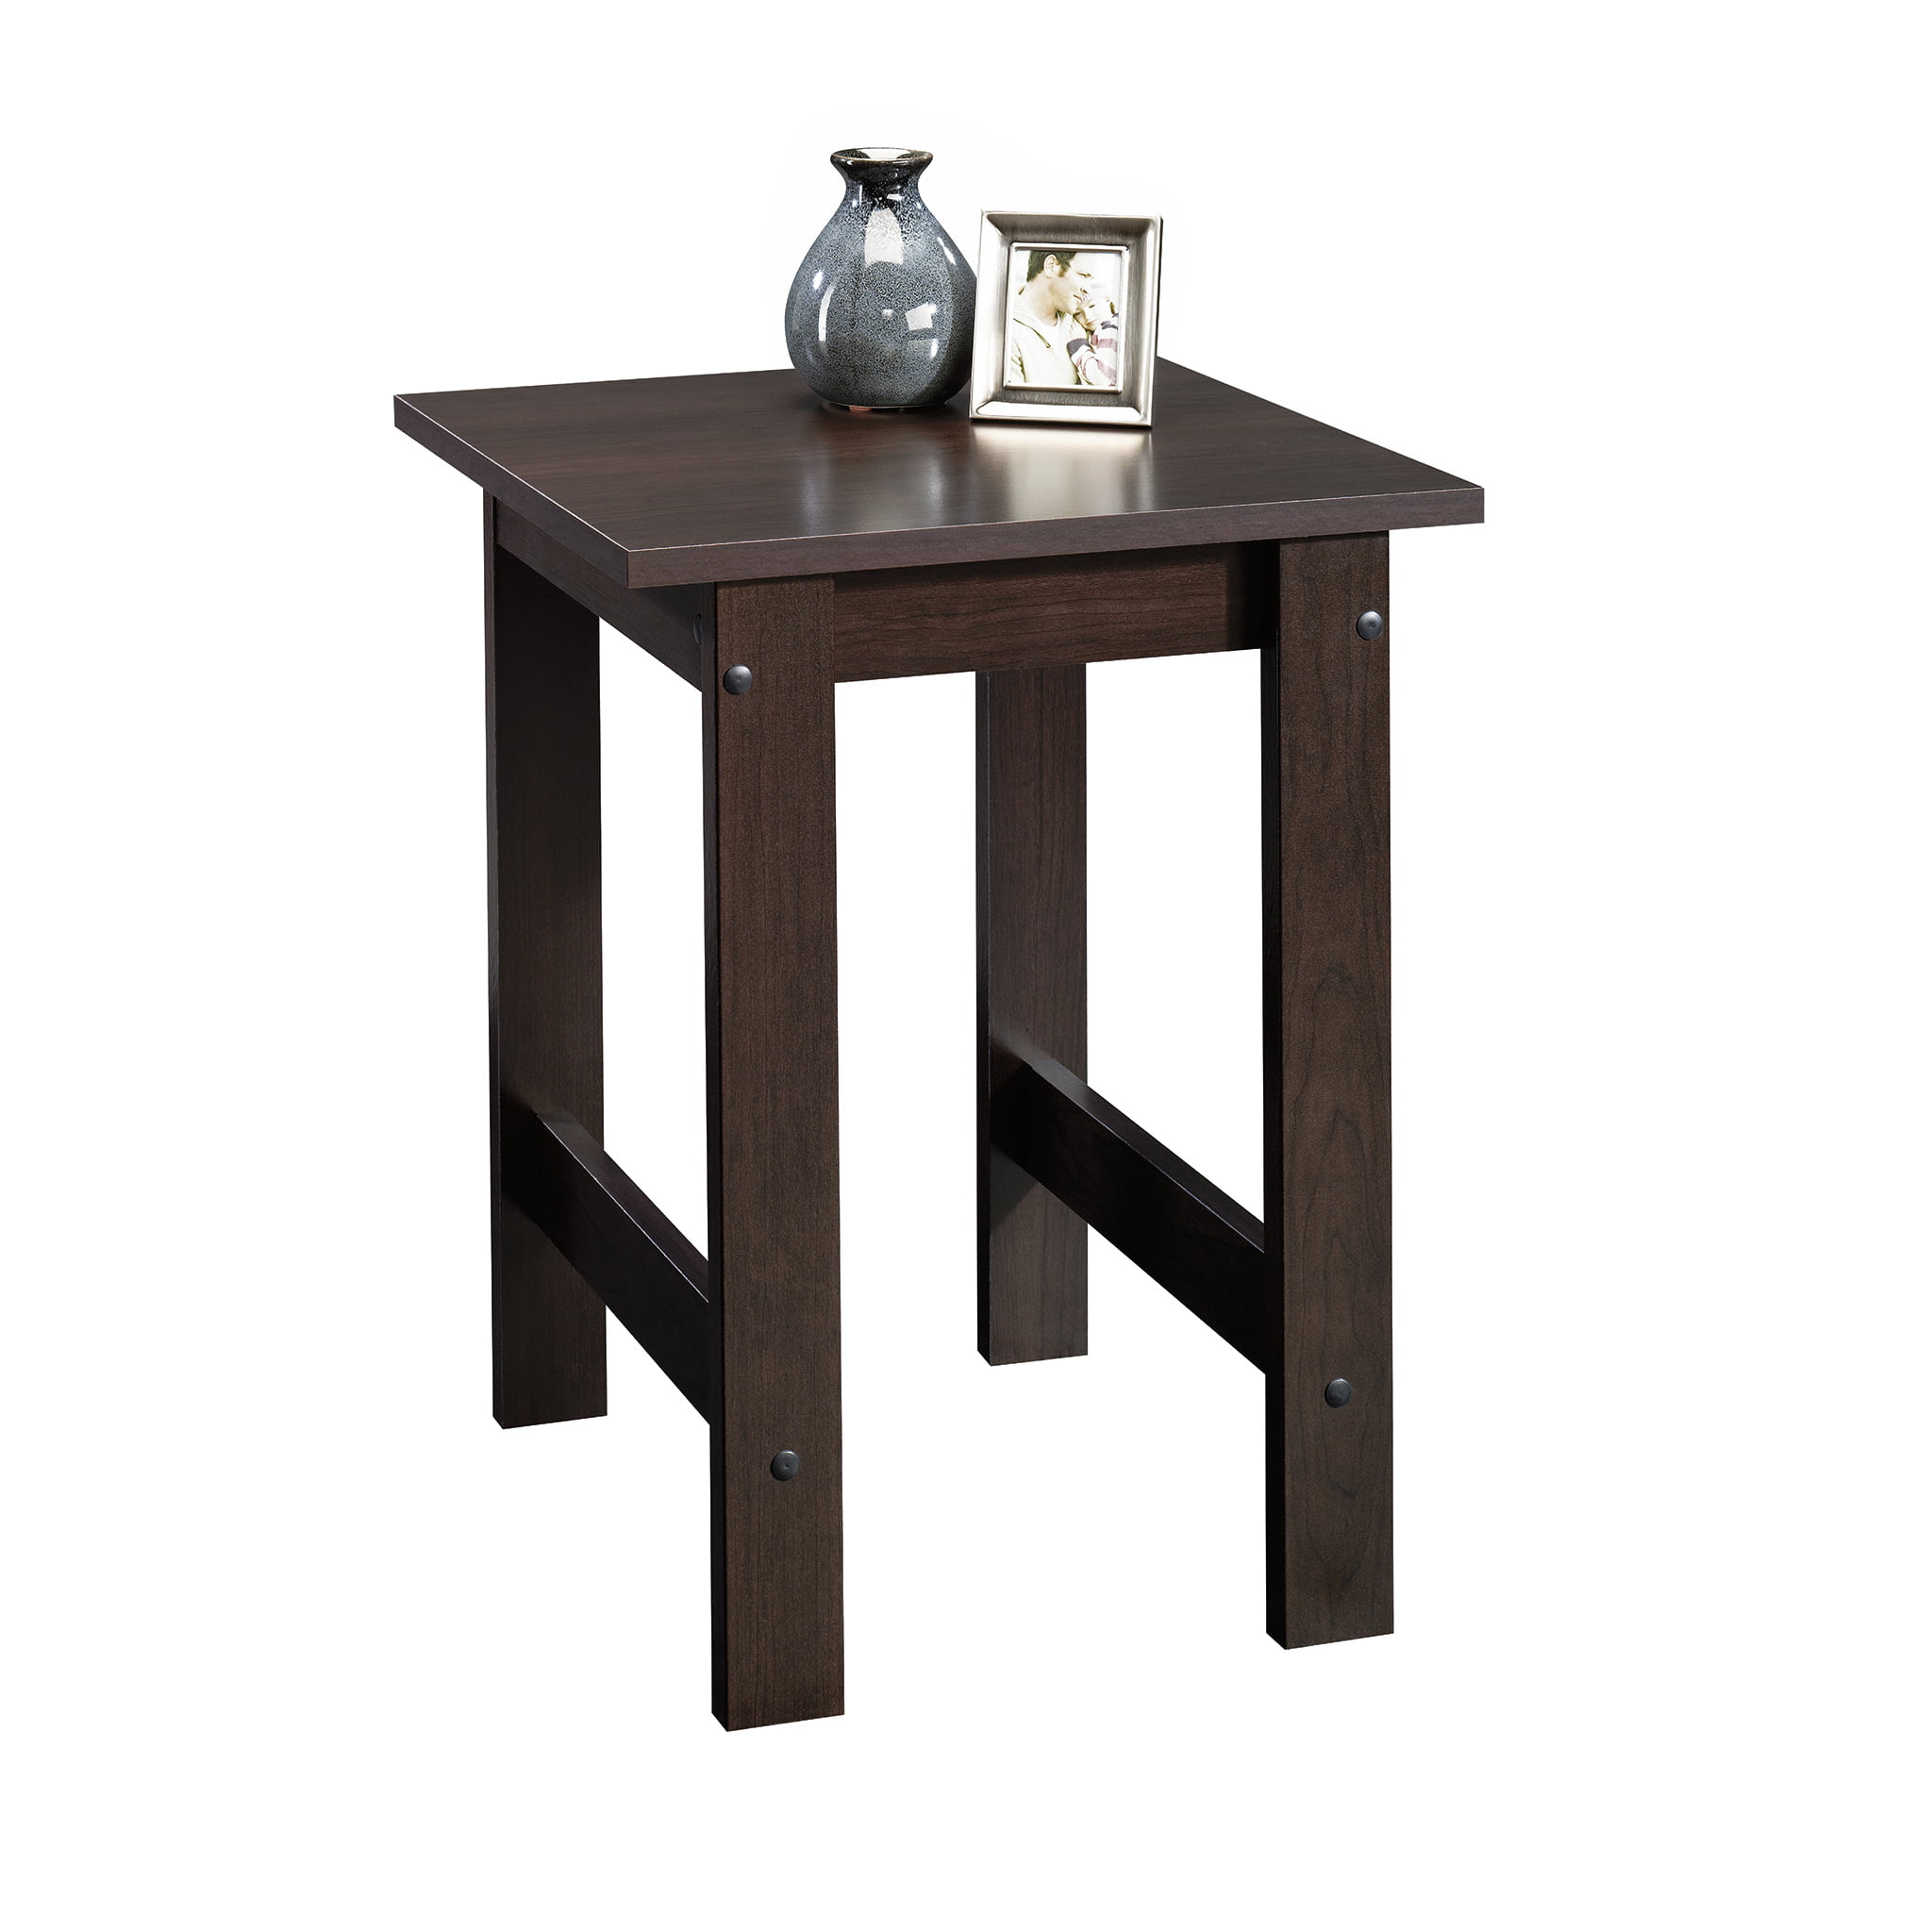 Sauder Beginnings Collection Side Table, Cinnamon Cherry (Espresso) Finish $14.99 + FS w/ Prime or W+